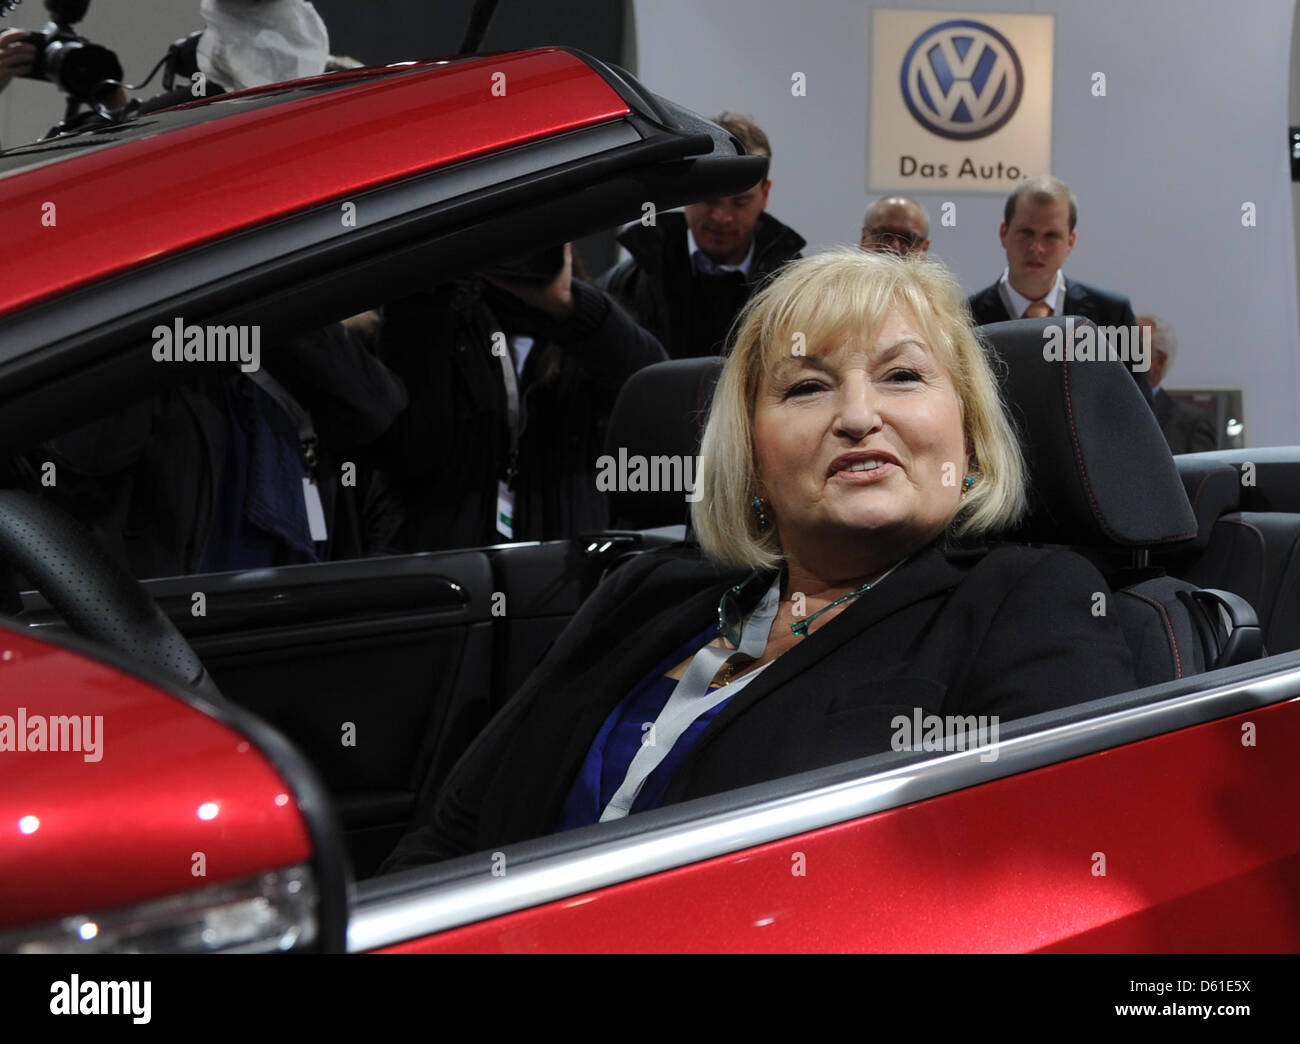 Wife of the chairman of Volkswagen Supervisory Board, Ferdinand Piech, Ursula Piech sits in a VW Golf convertible car during the general meeting of car manufacturer  Volkswagen in Hamburg, Germany, 19 April 2012. Ursula Piech will be elected to the supervisory board during the meeting. Photo: MARCUS BRANDT Stock Photo